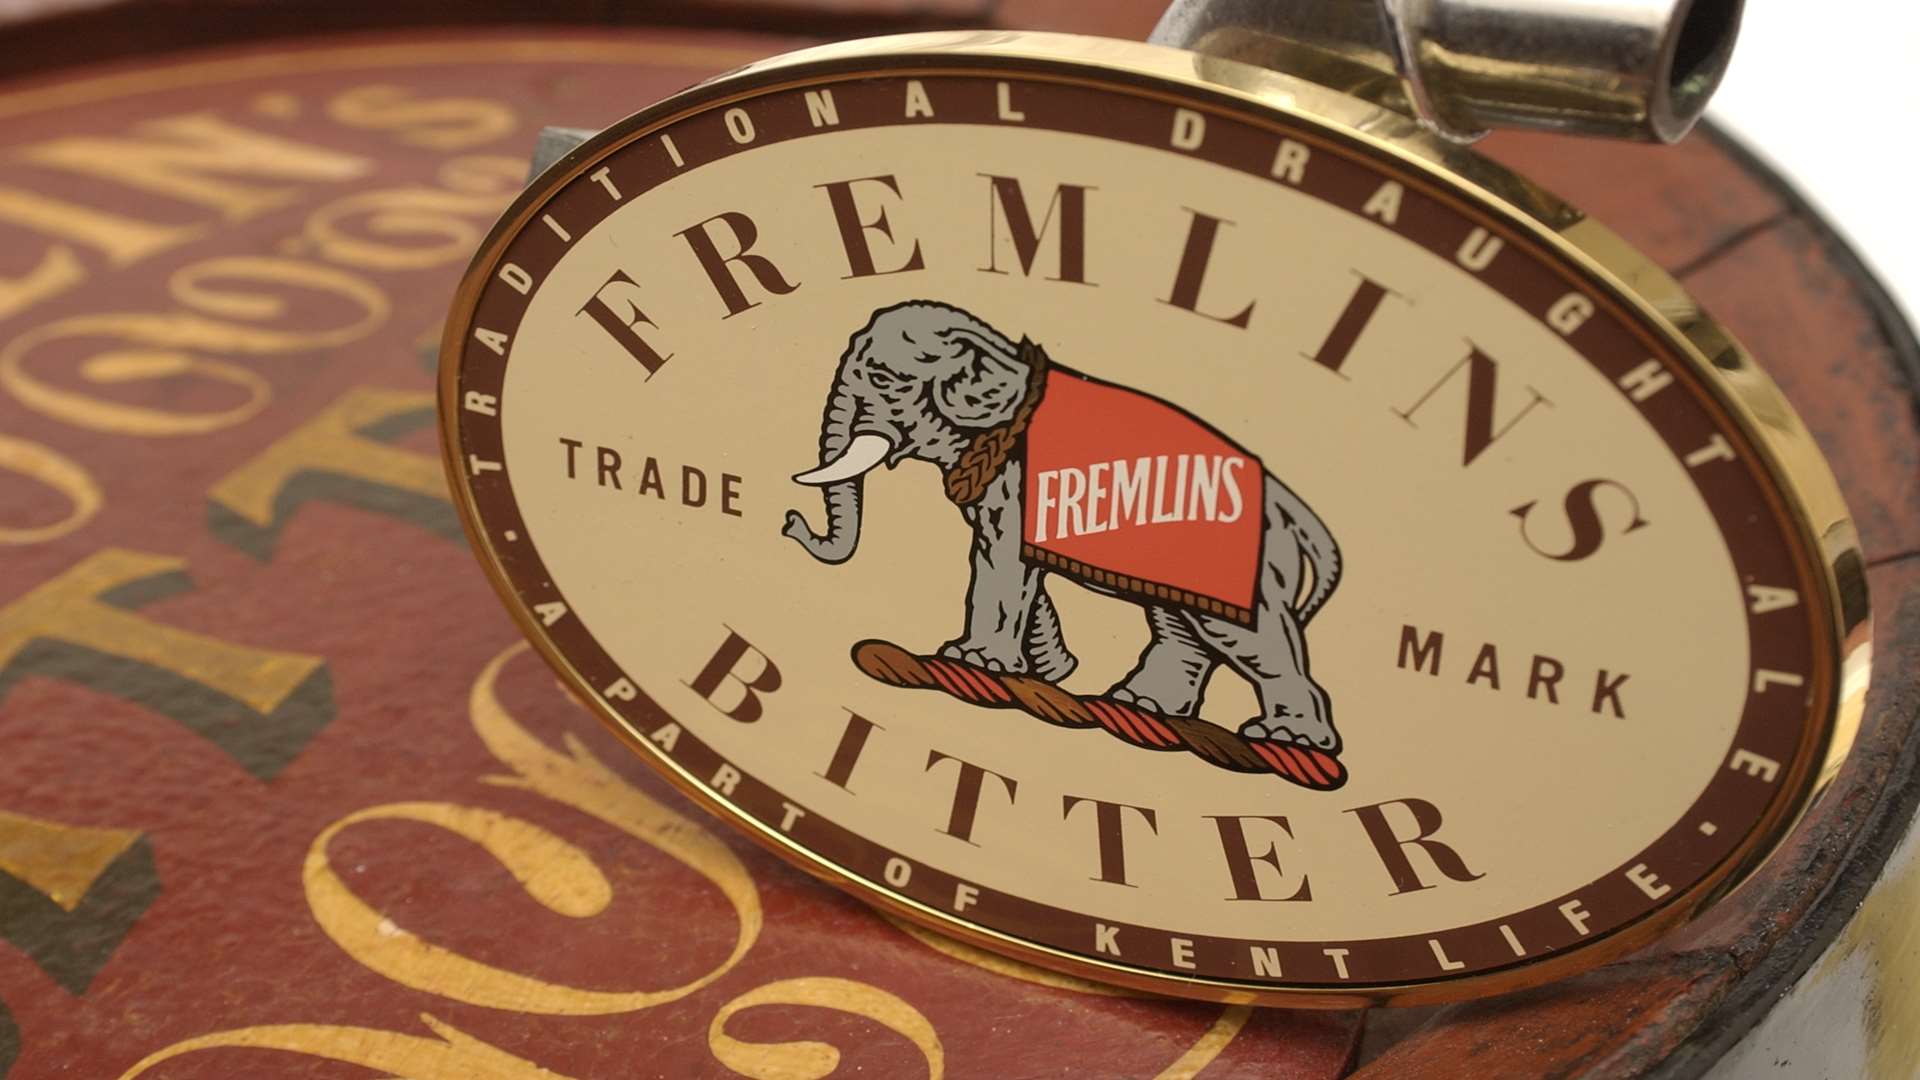 The former Fremlin's Brewery elephant logo has been part of Maidstone’s history since the 1860s